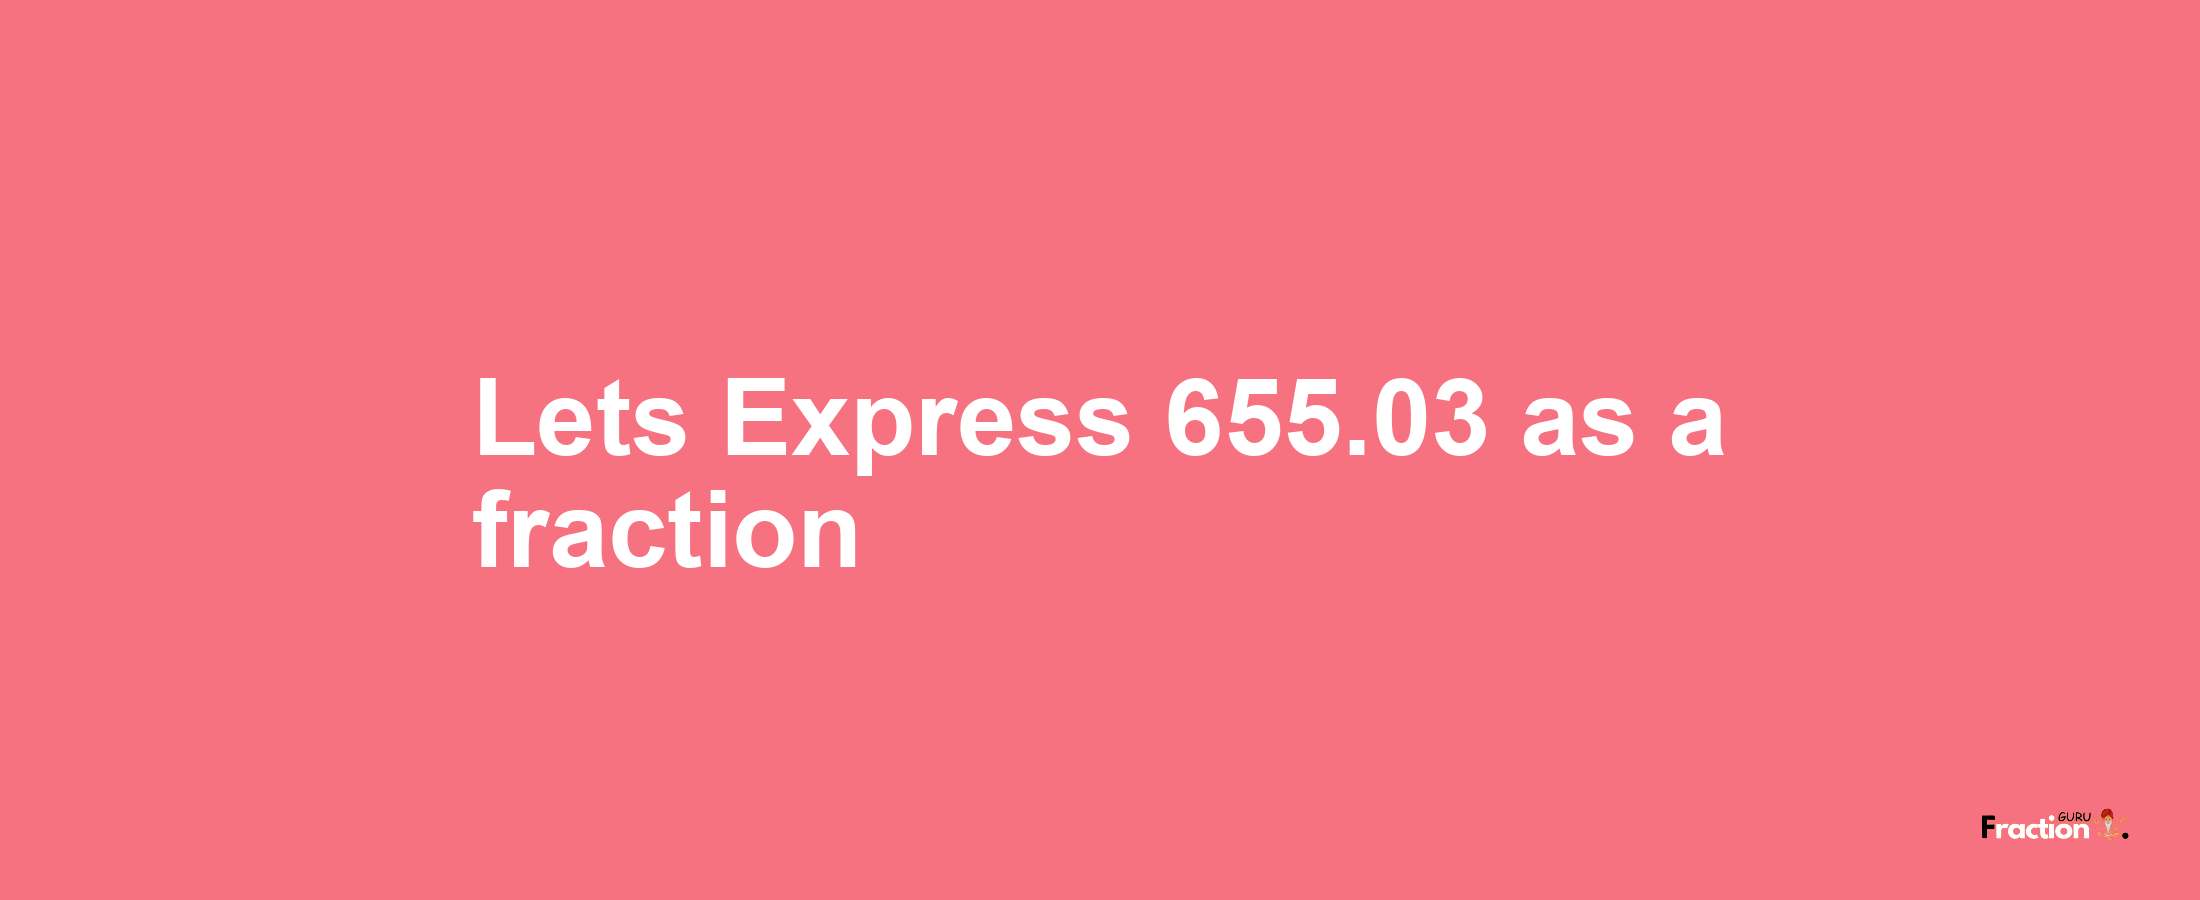 Lets Express 655.03 as afraction